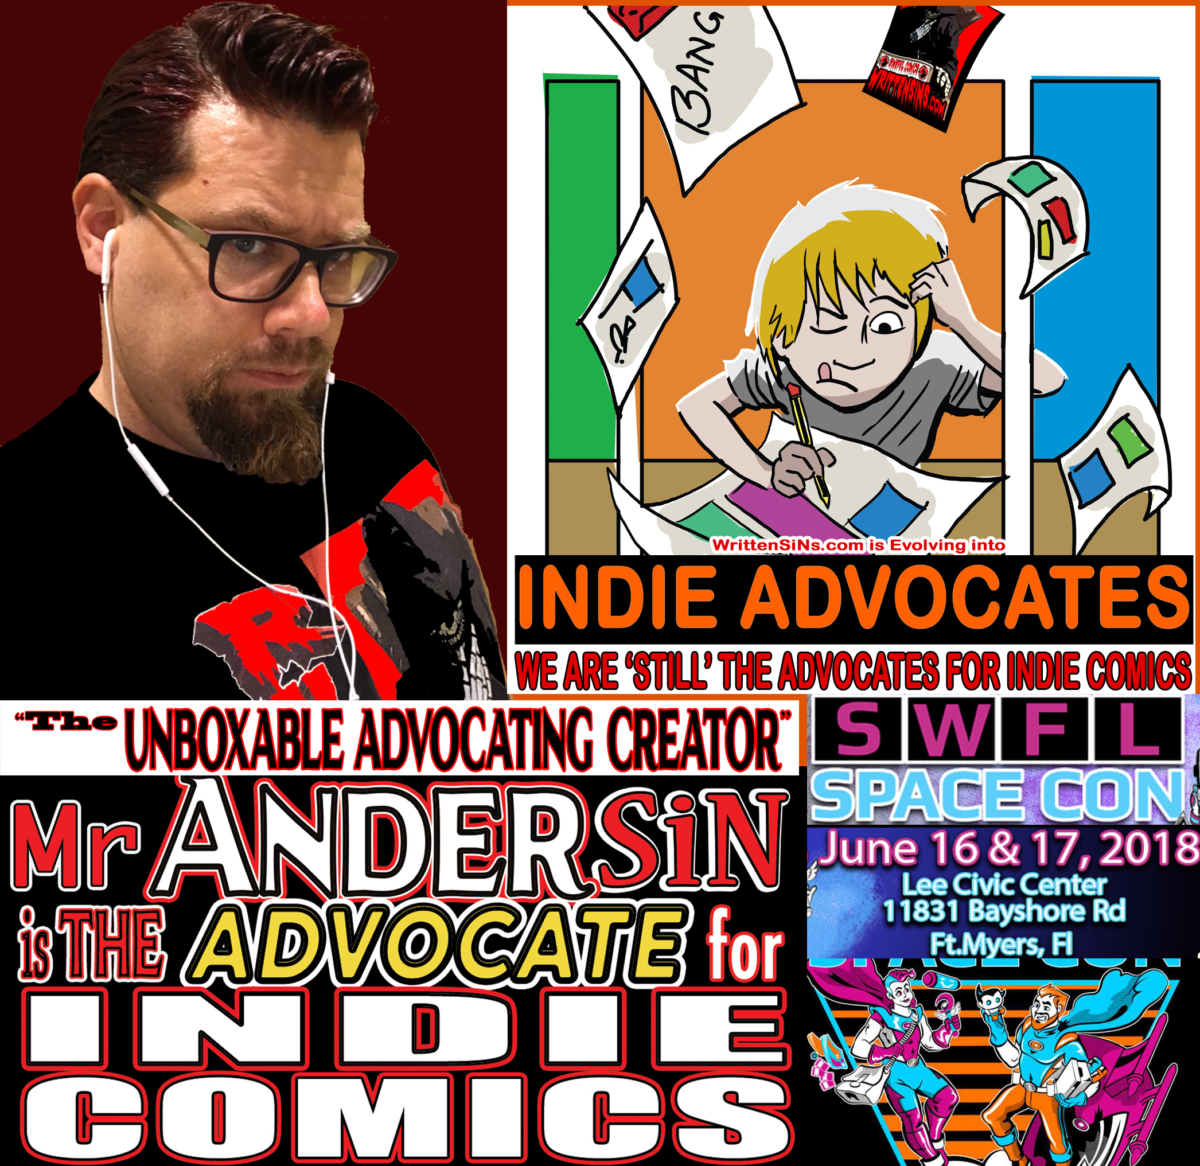 COMIC CON HIGHWAY EXITING with INDIE ADVOCATING  in FLORIDA:: Mr. Andersin & INDIE ADVOCATES got to ADVOCATE at Home in Fort Myers @ SWFL SPACE COMIC CON June 16-17  .  .